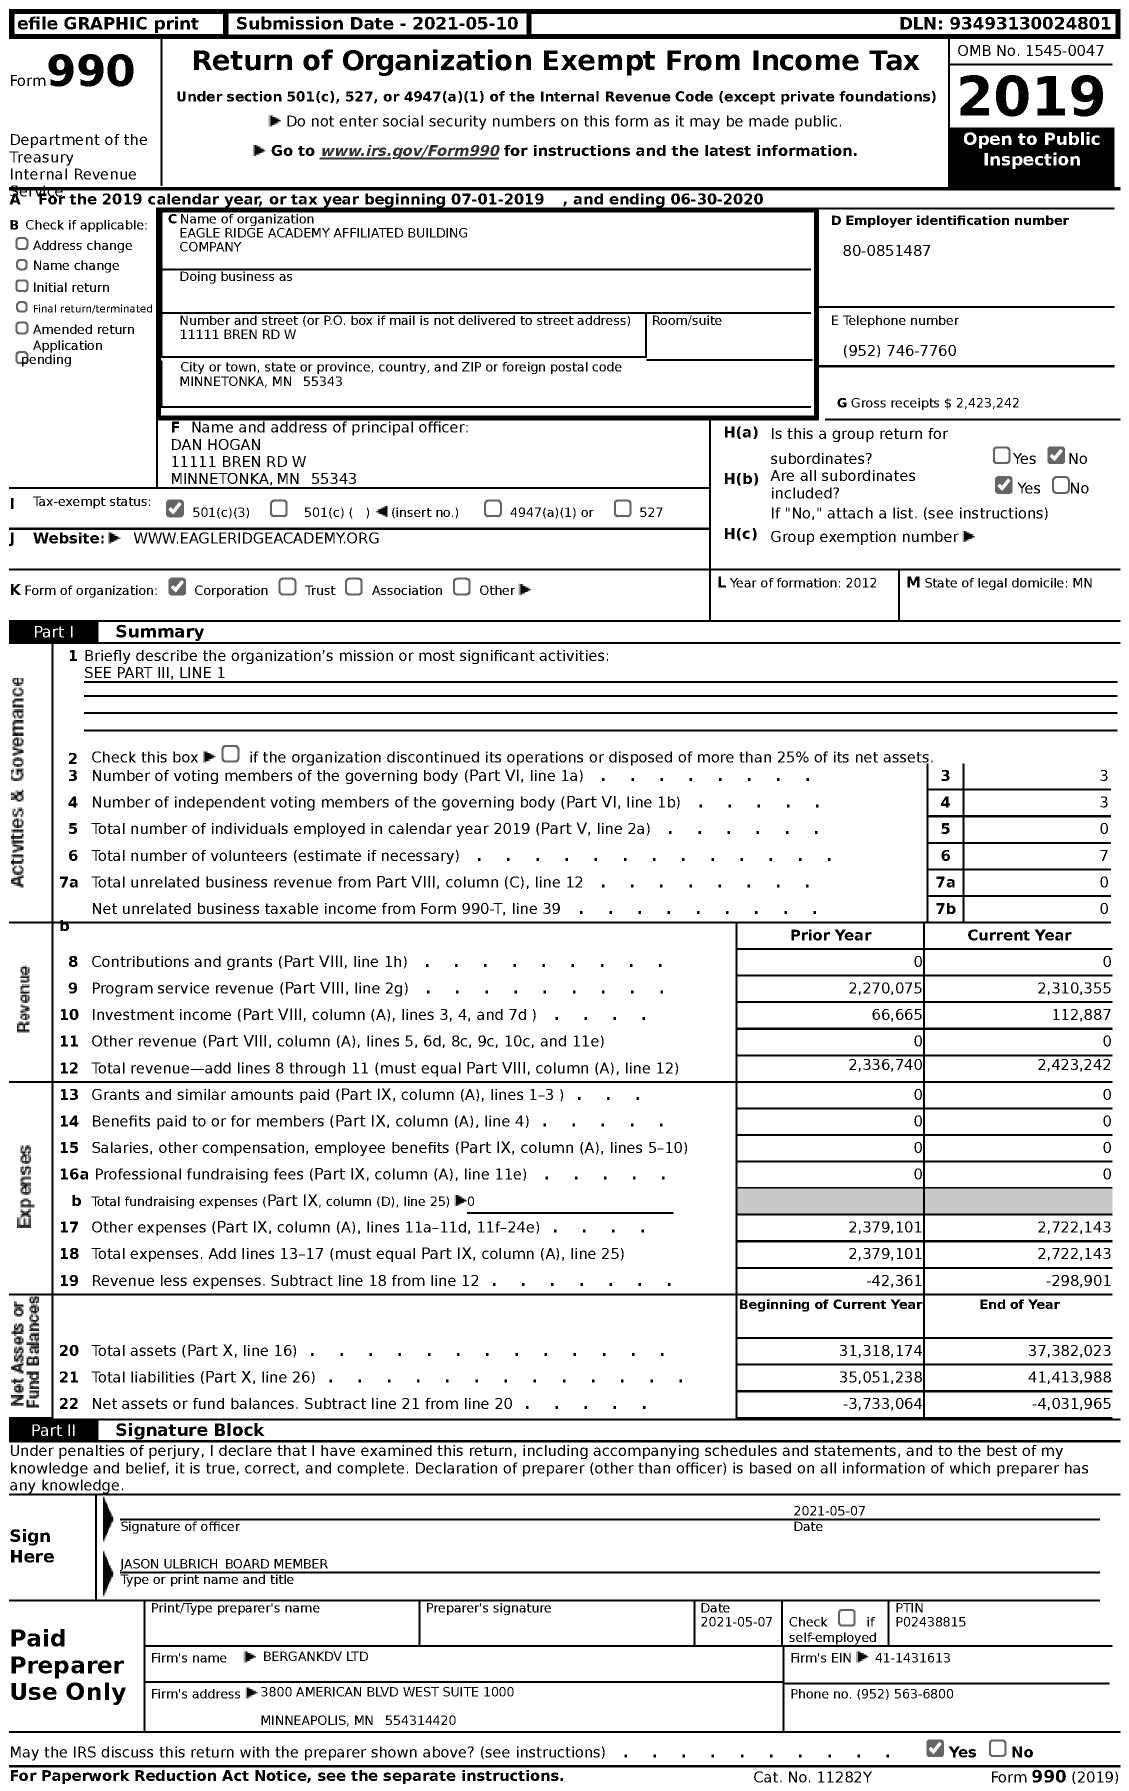 Image of first page of 2019 Form 990 for Eagle Ridge Academy Affiliated Building Company